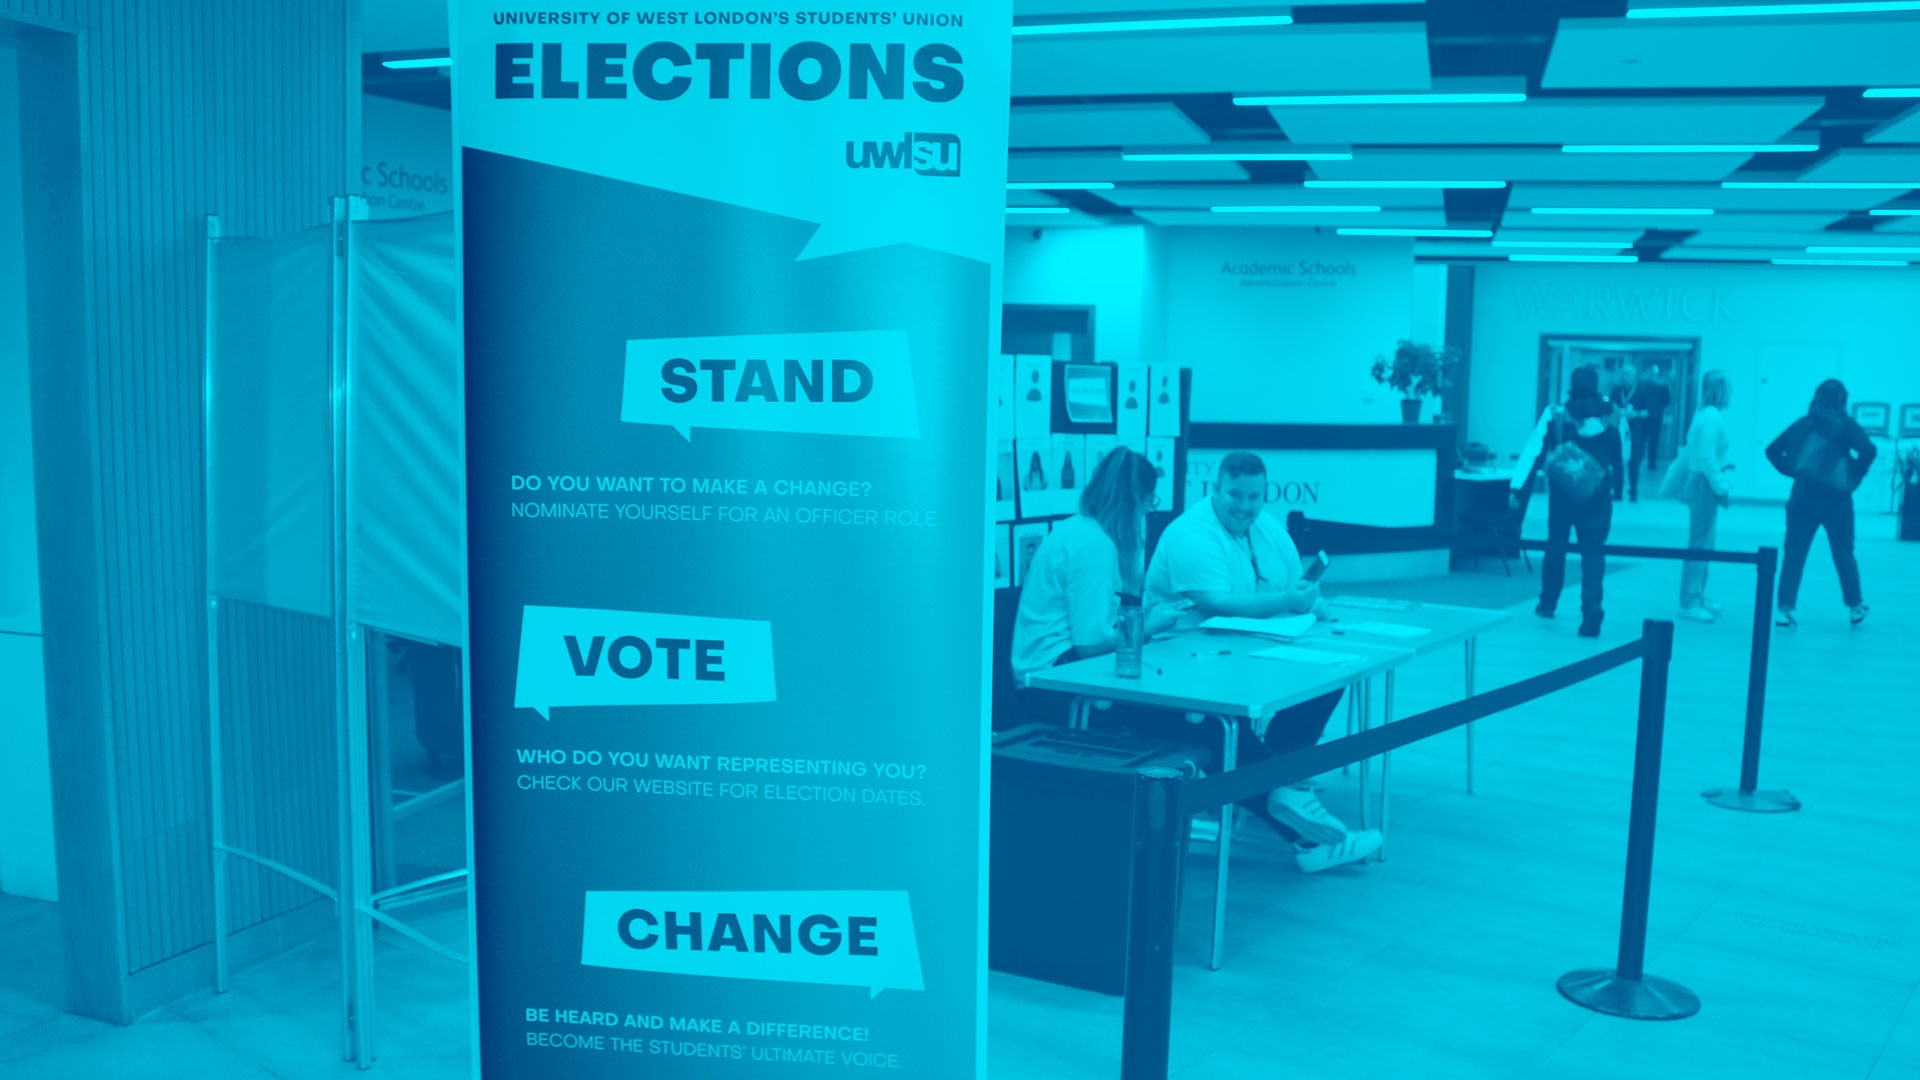 An elections stand in the UWLSU building